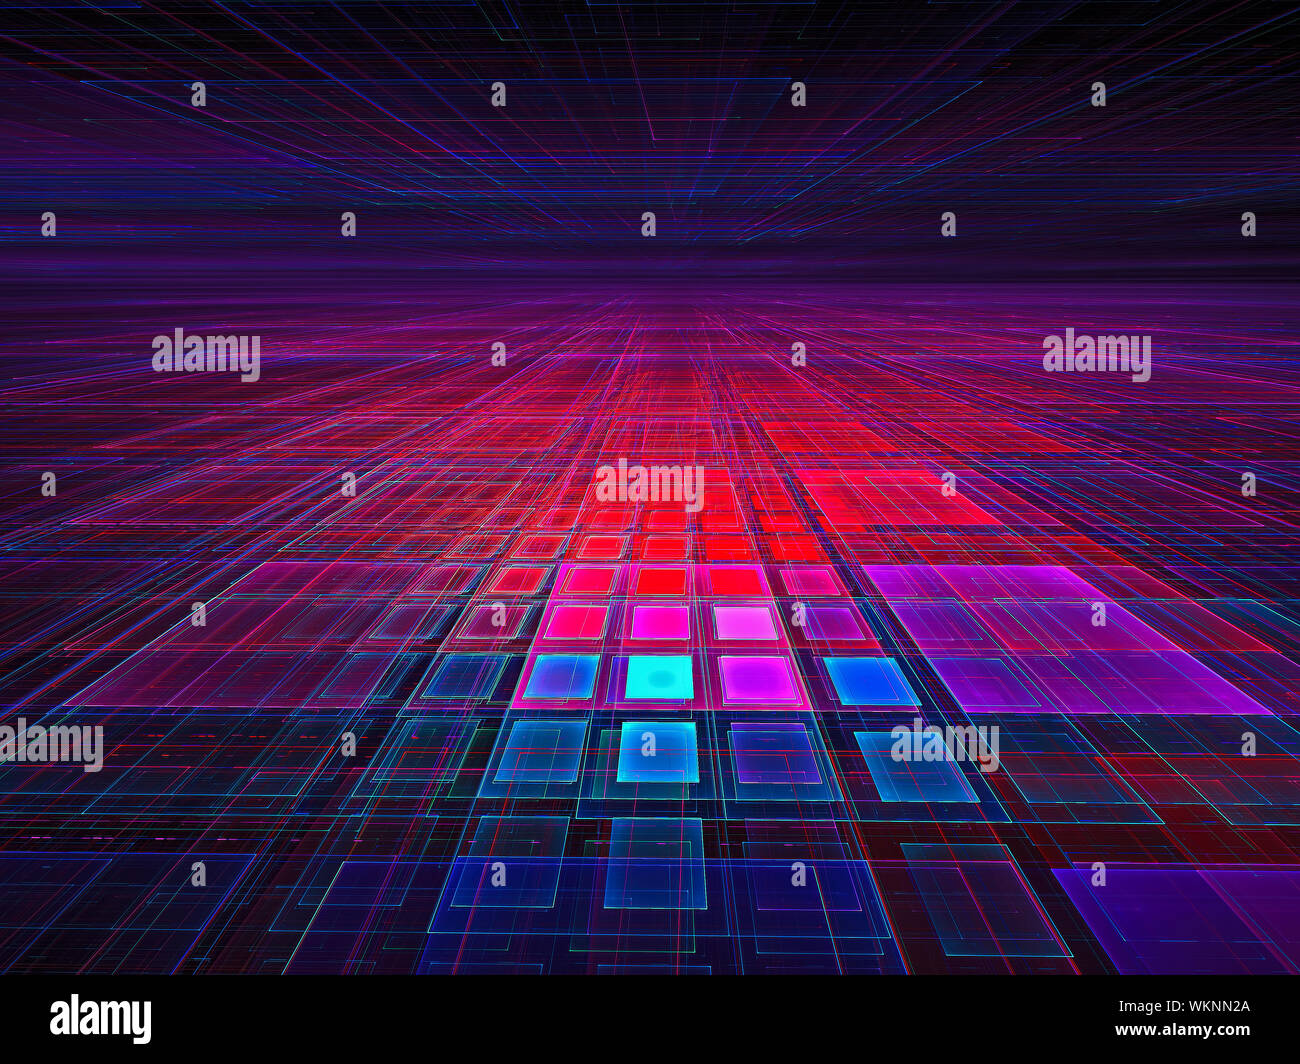 Neon glowing grid - abstract digitally generated 3d illustration Stock Photo